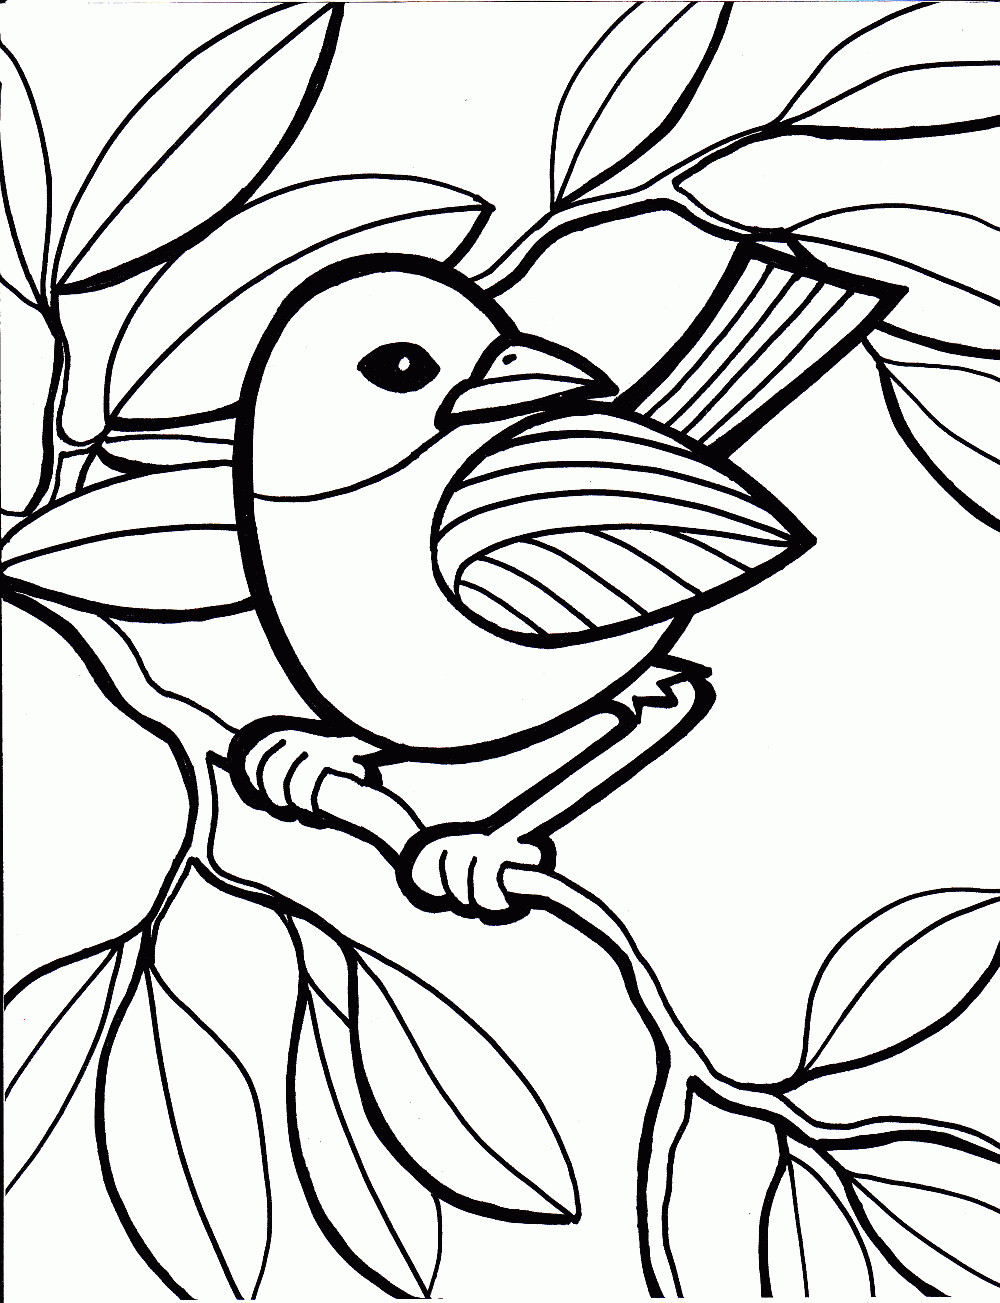 Free Online Coloring Pages For Kids
 Free Coloring Pages For Kids Top Profile